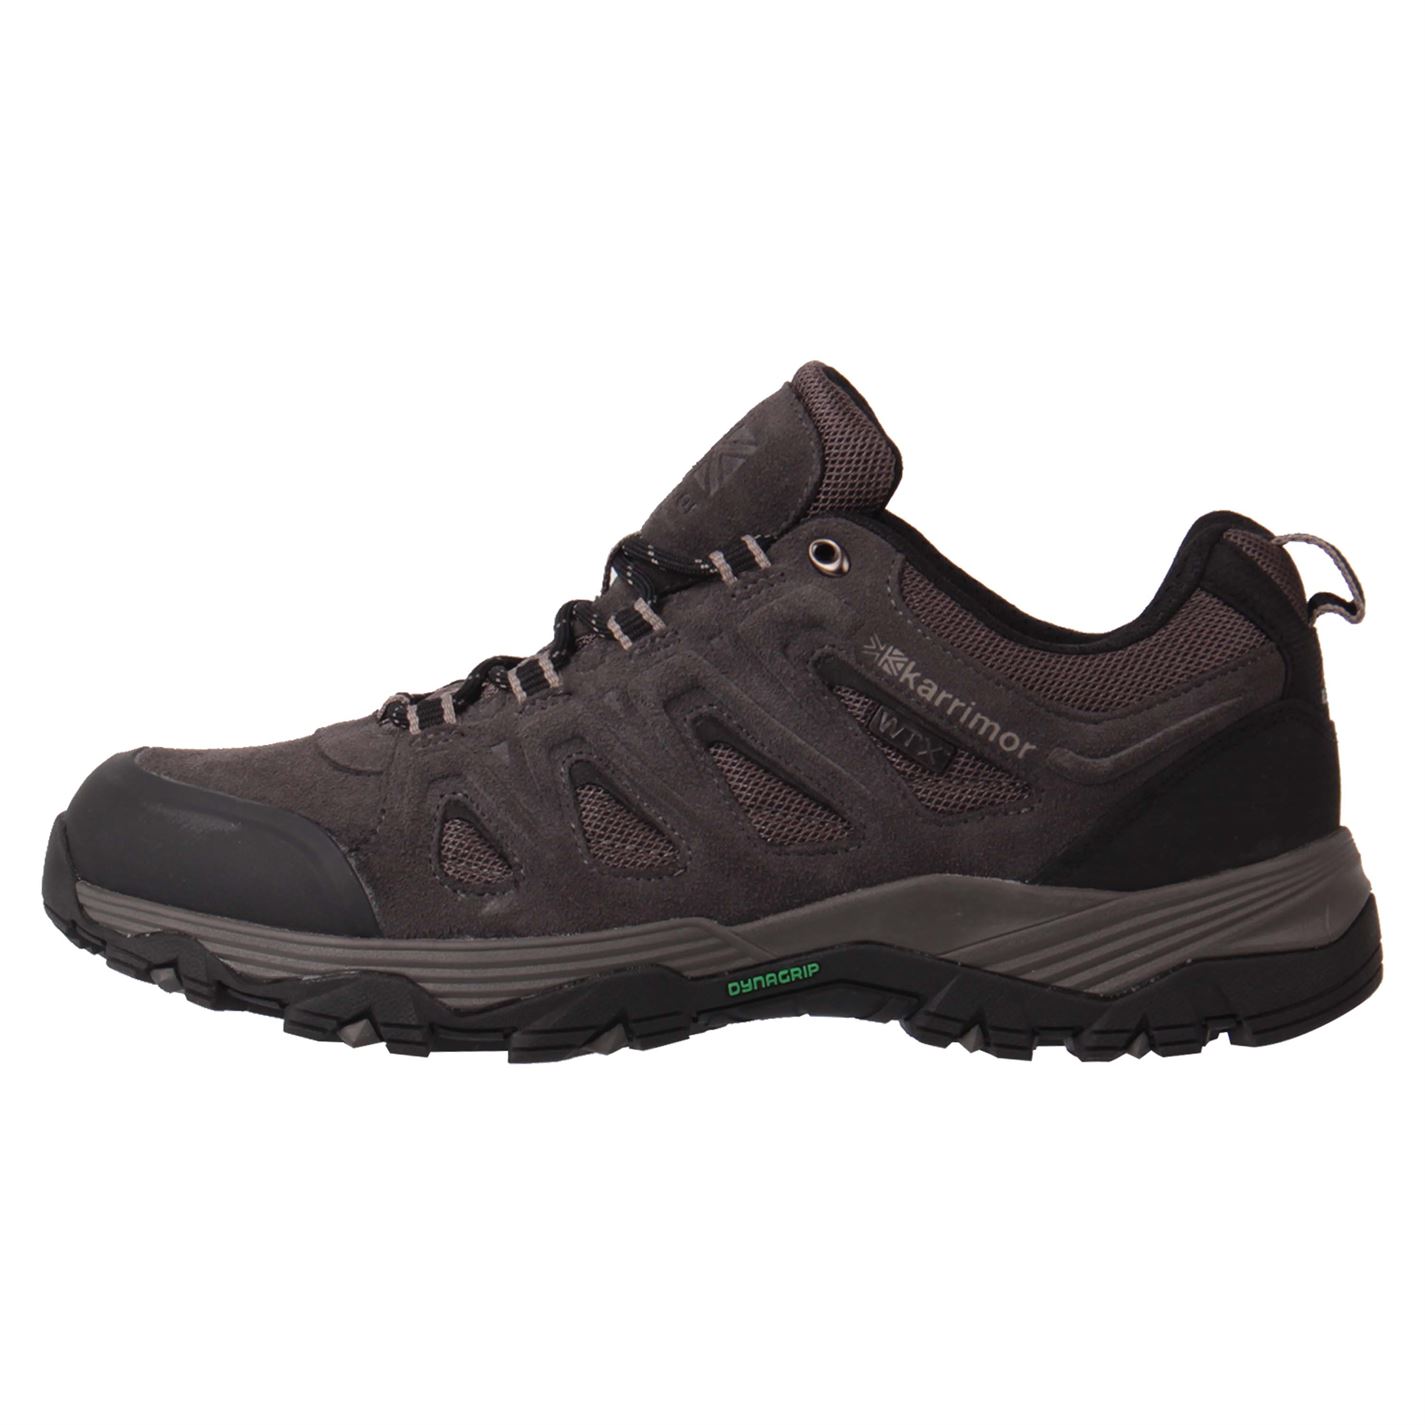 Karrimor Hot Route WTX Walking Shoes review  YouTube